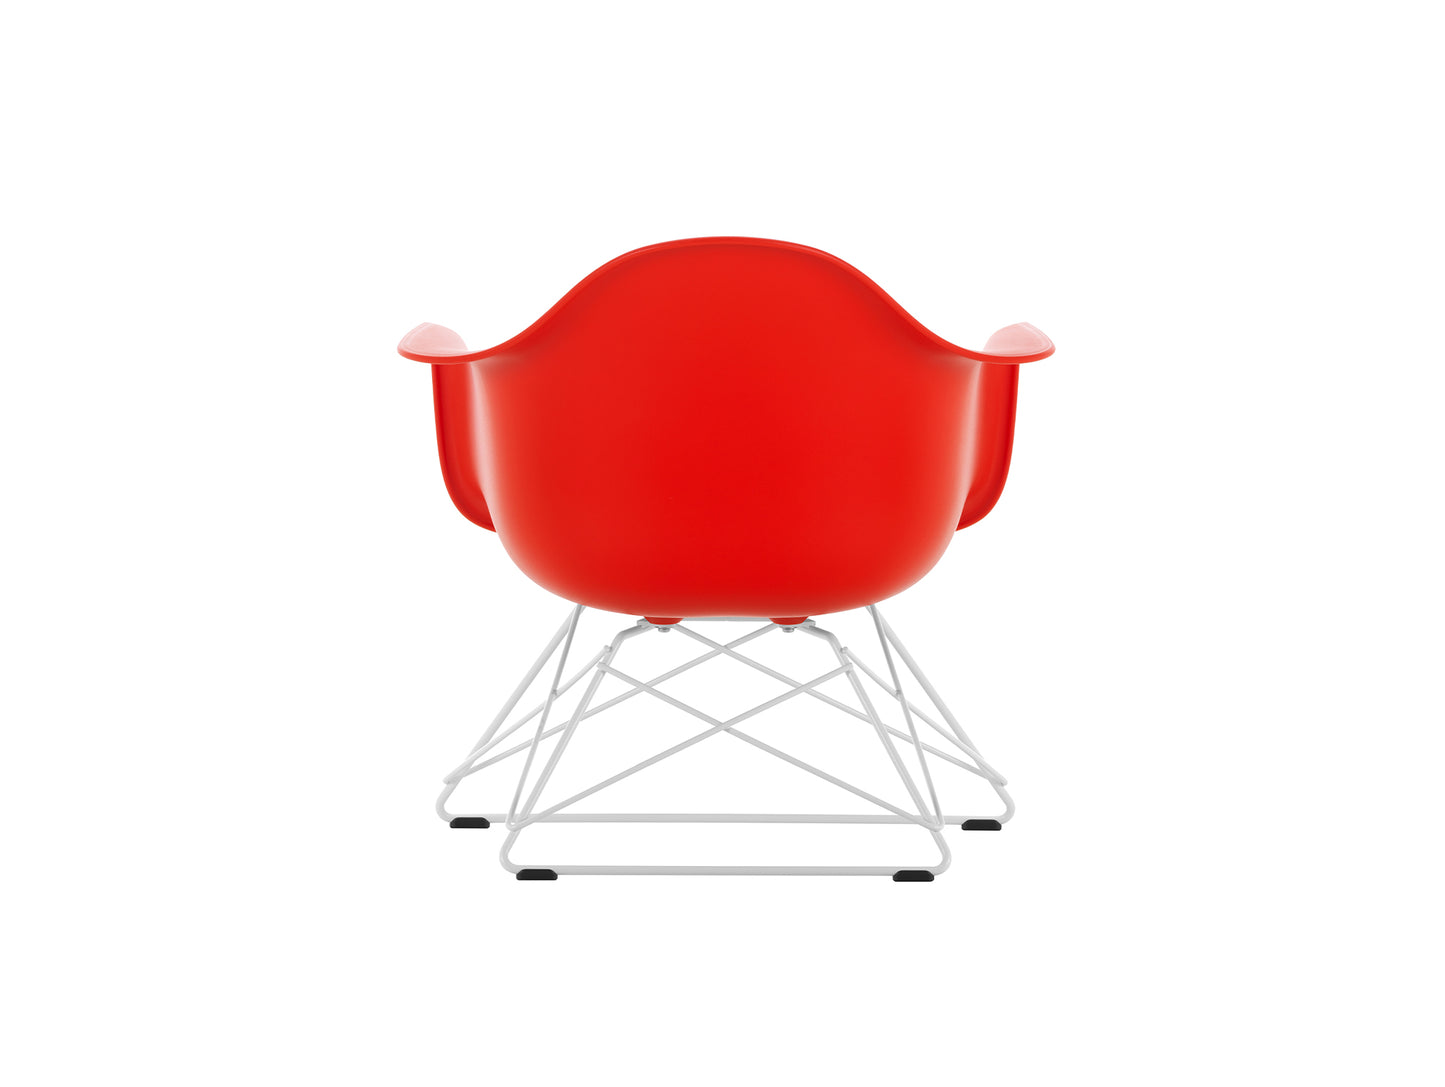 Eames Plastic Armchair LAR by Vitra - Poppy Red 03 Shell / White Powder-Coated Steel